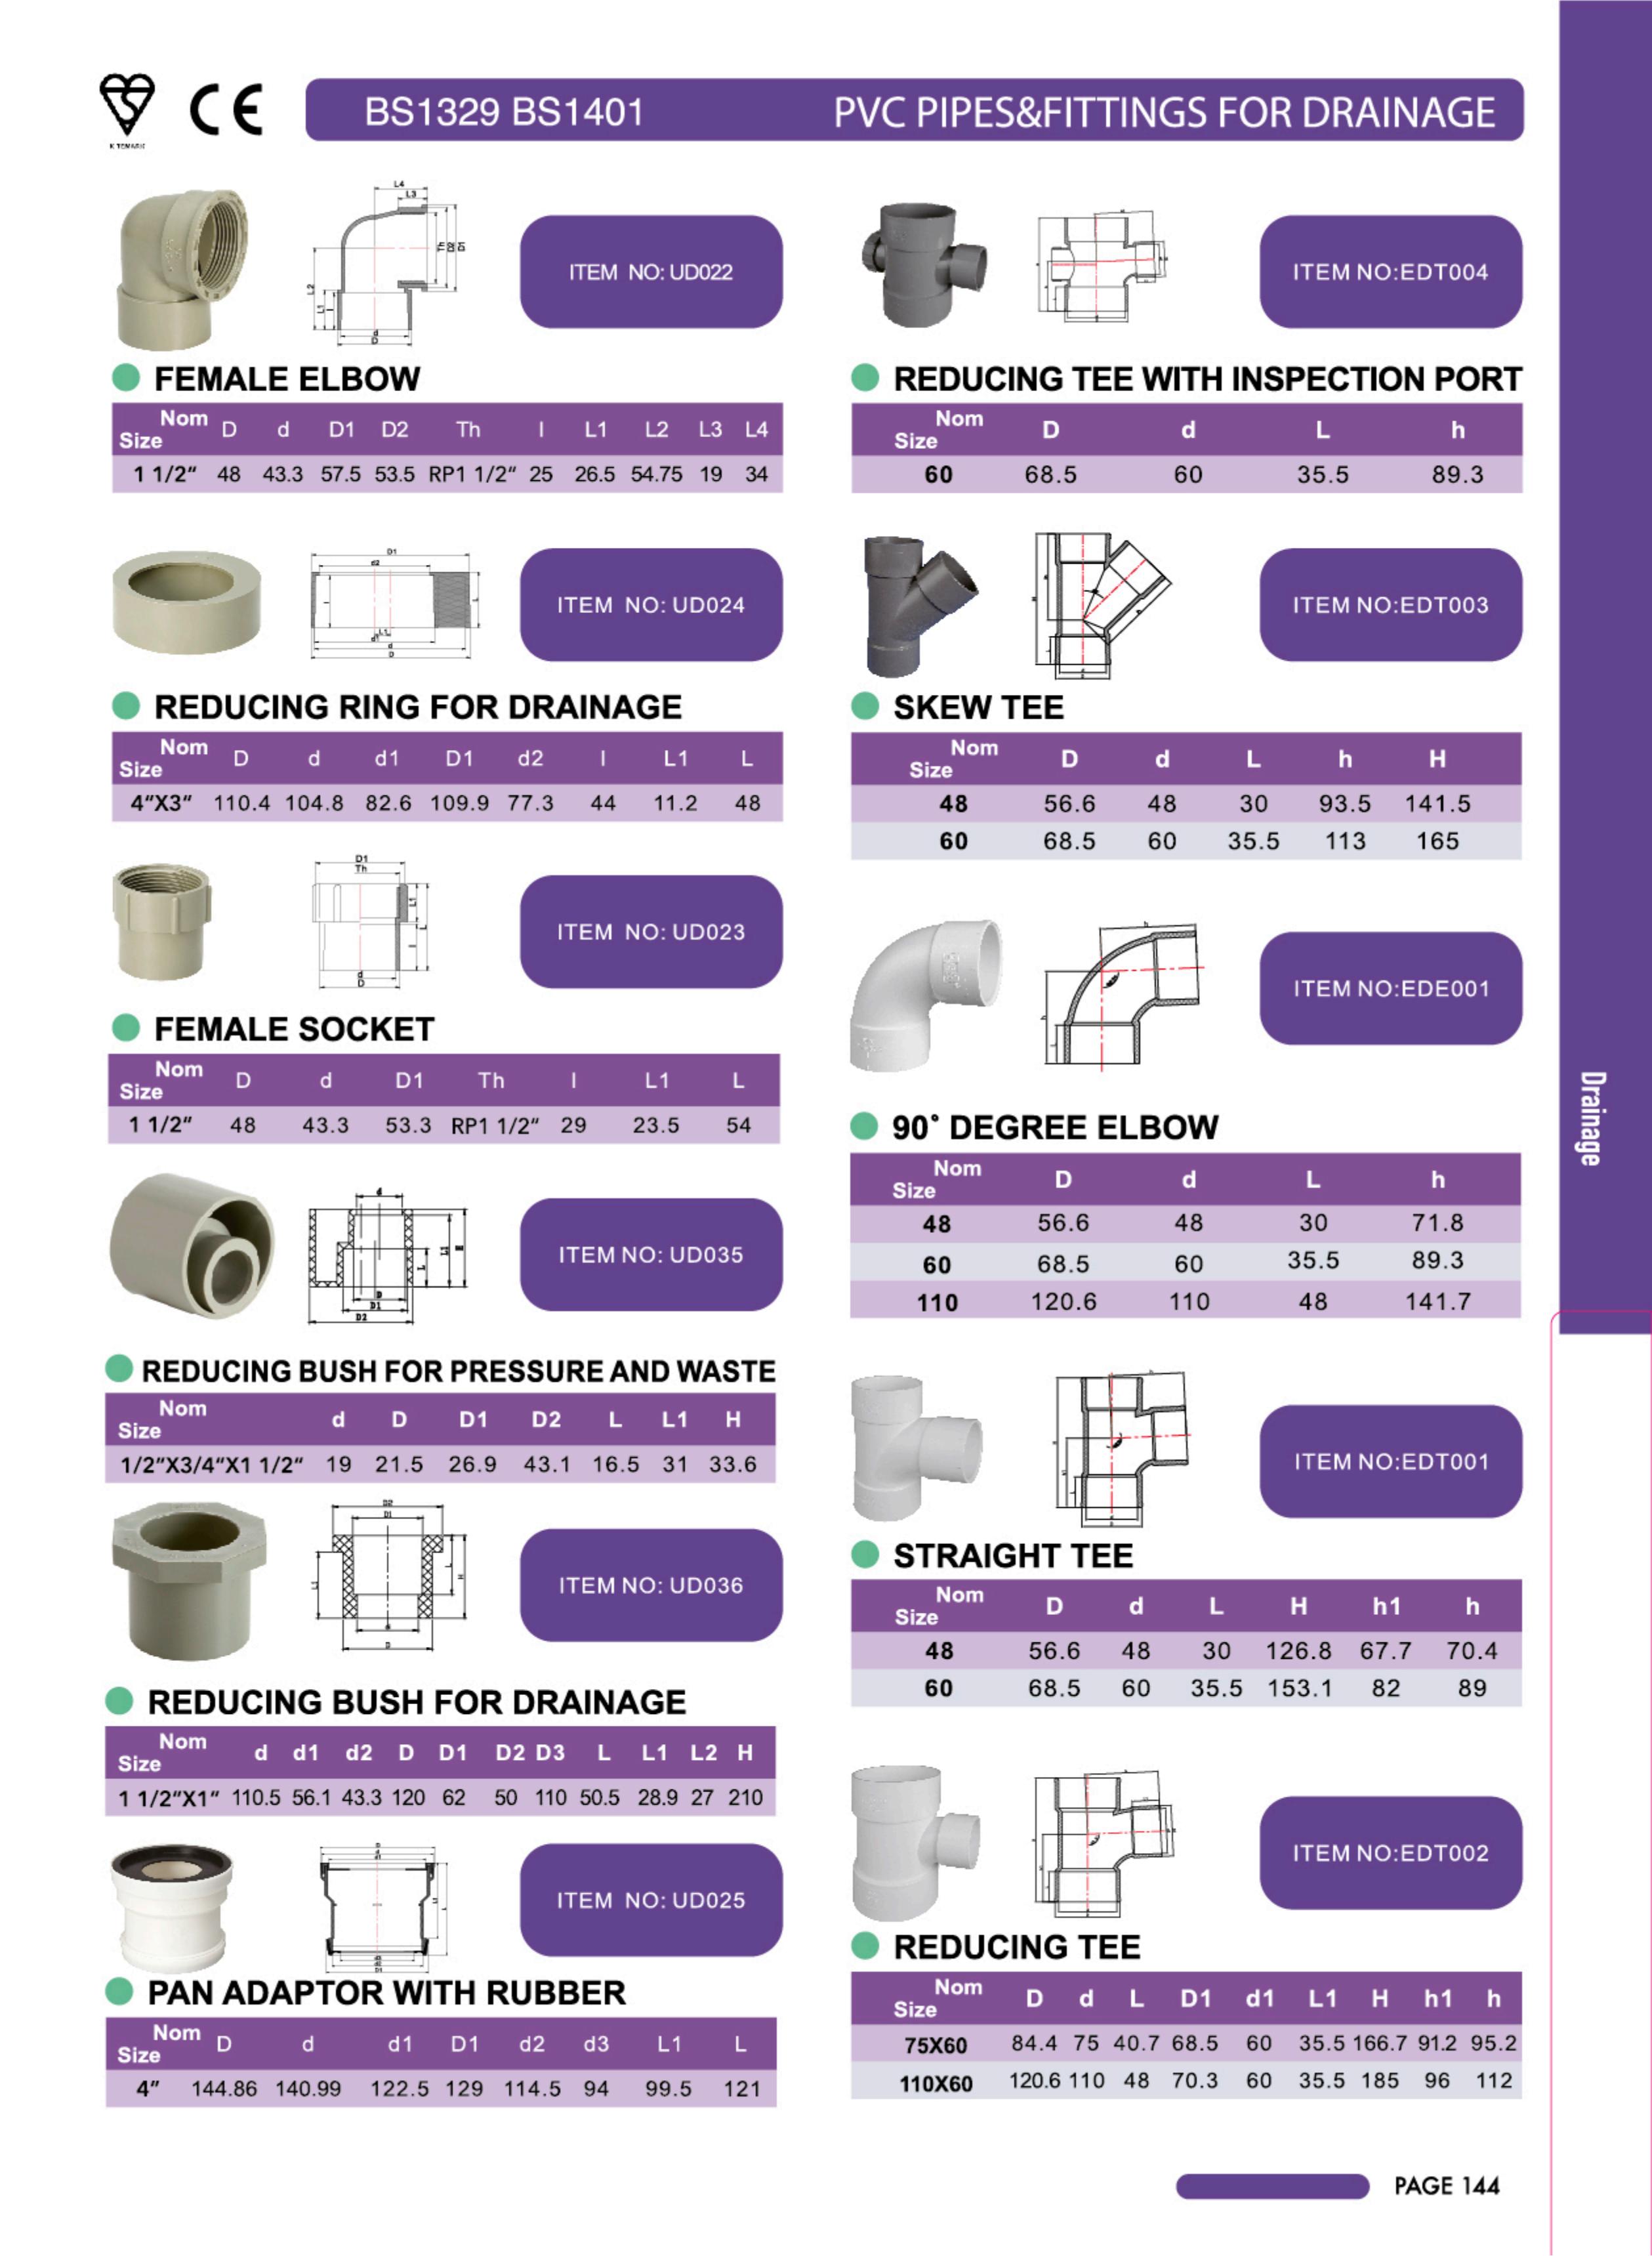 PVC PIPES&FITTINGS FOR DRAINAGE